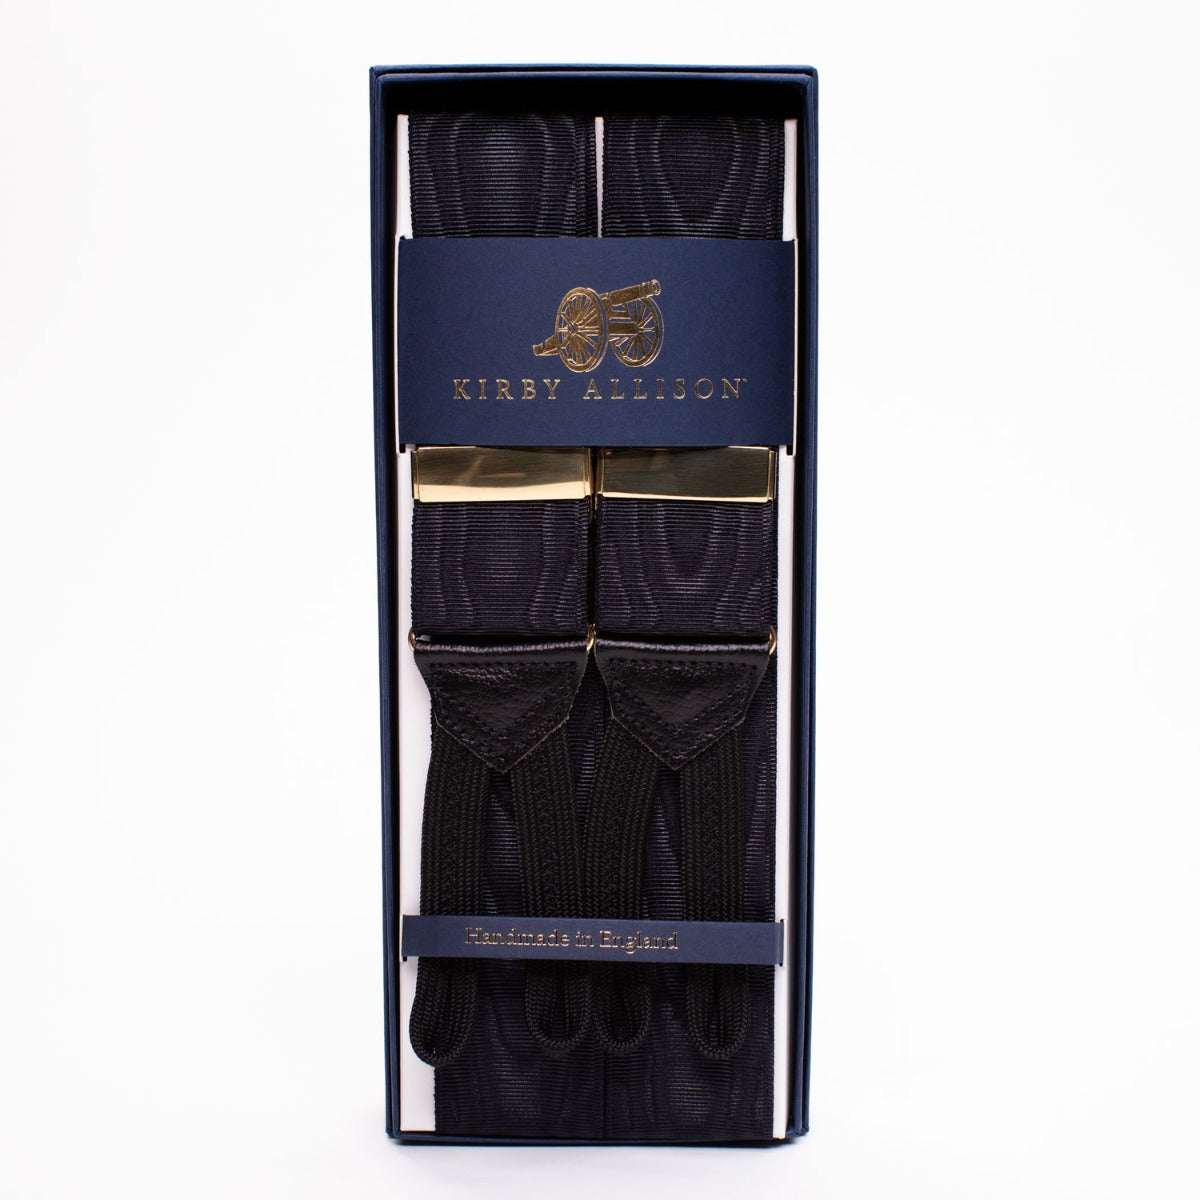 A pair of Sovereign Grade Black Moire Braces (Gold) by KirbyAllison.com in a box.